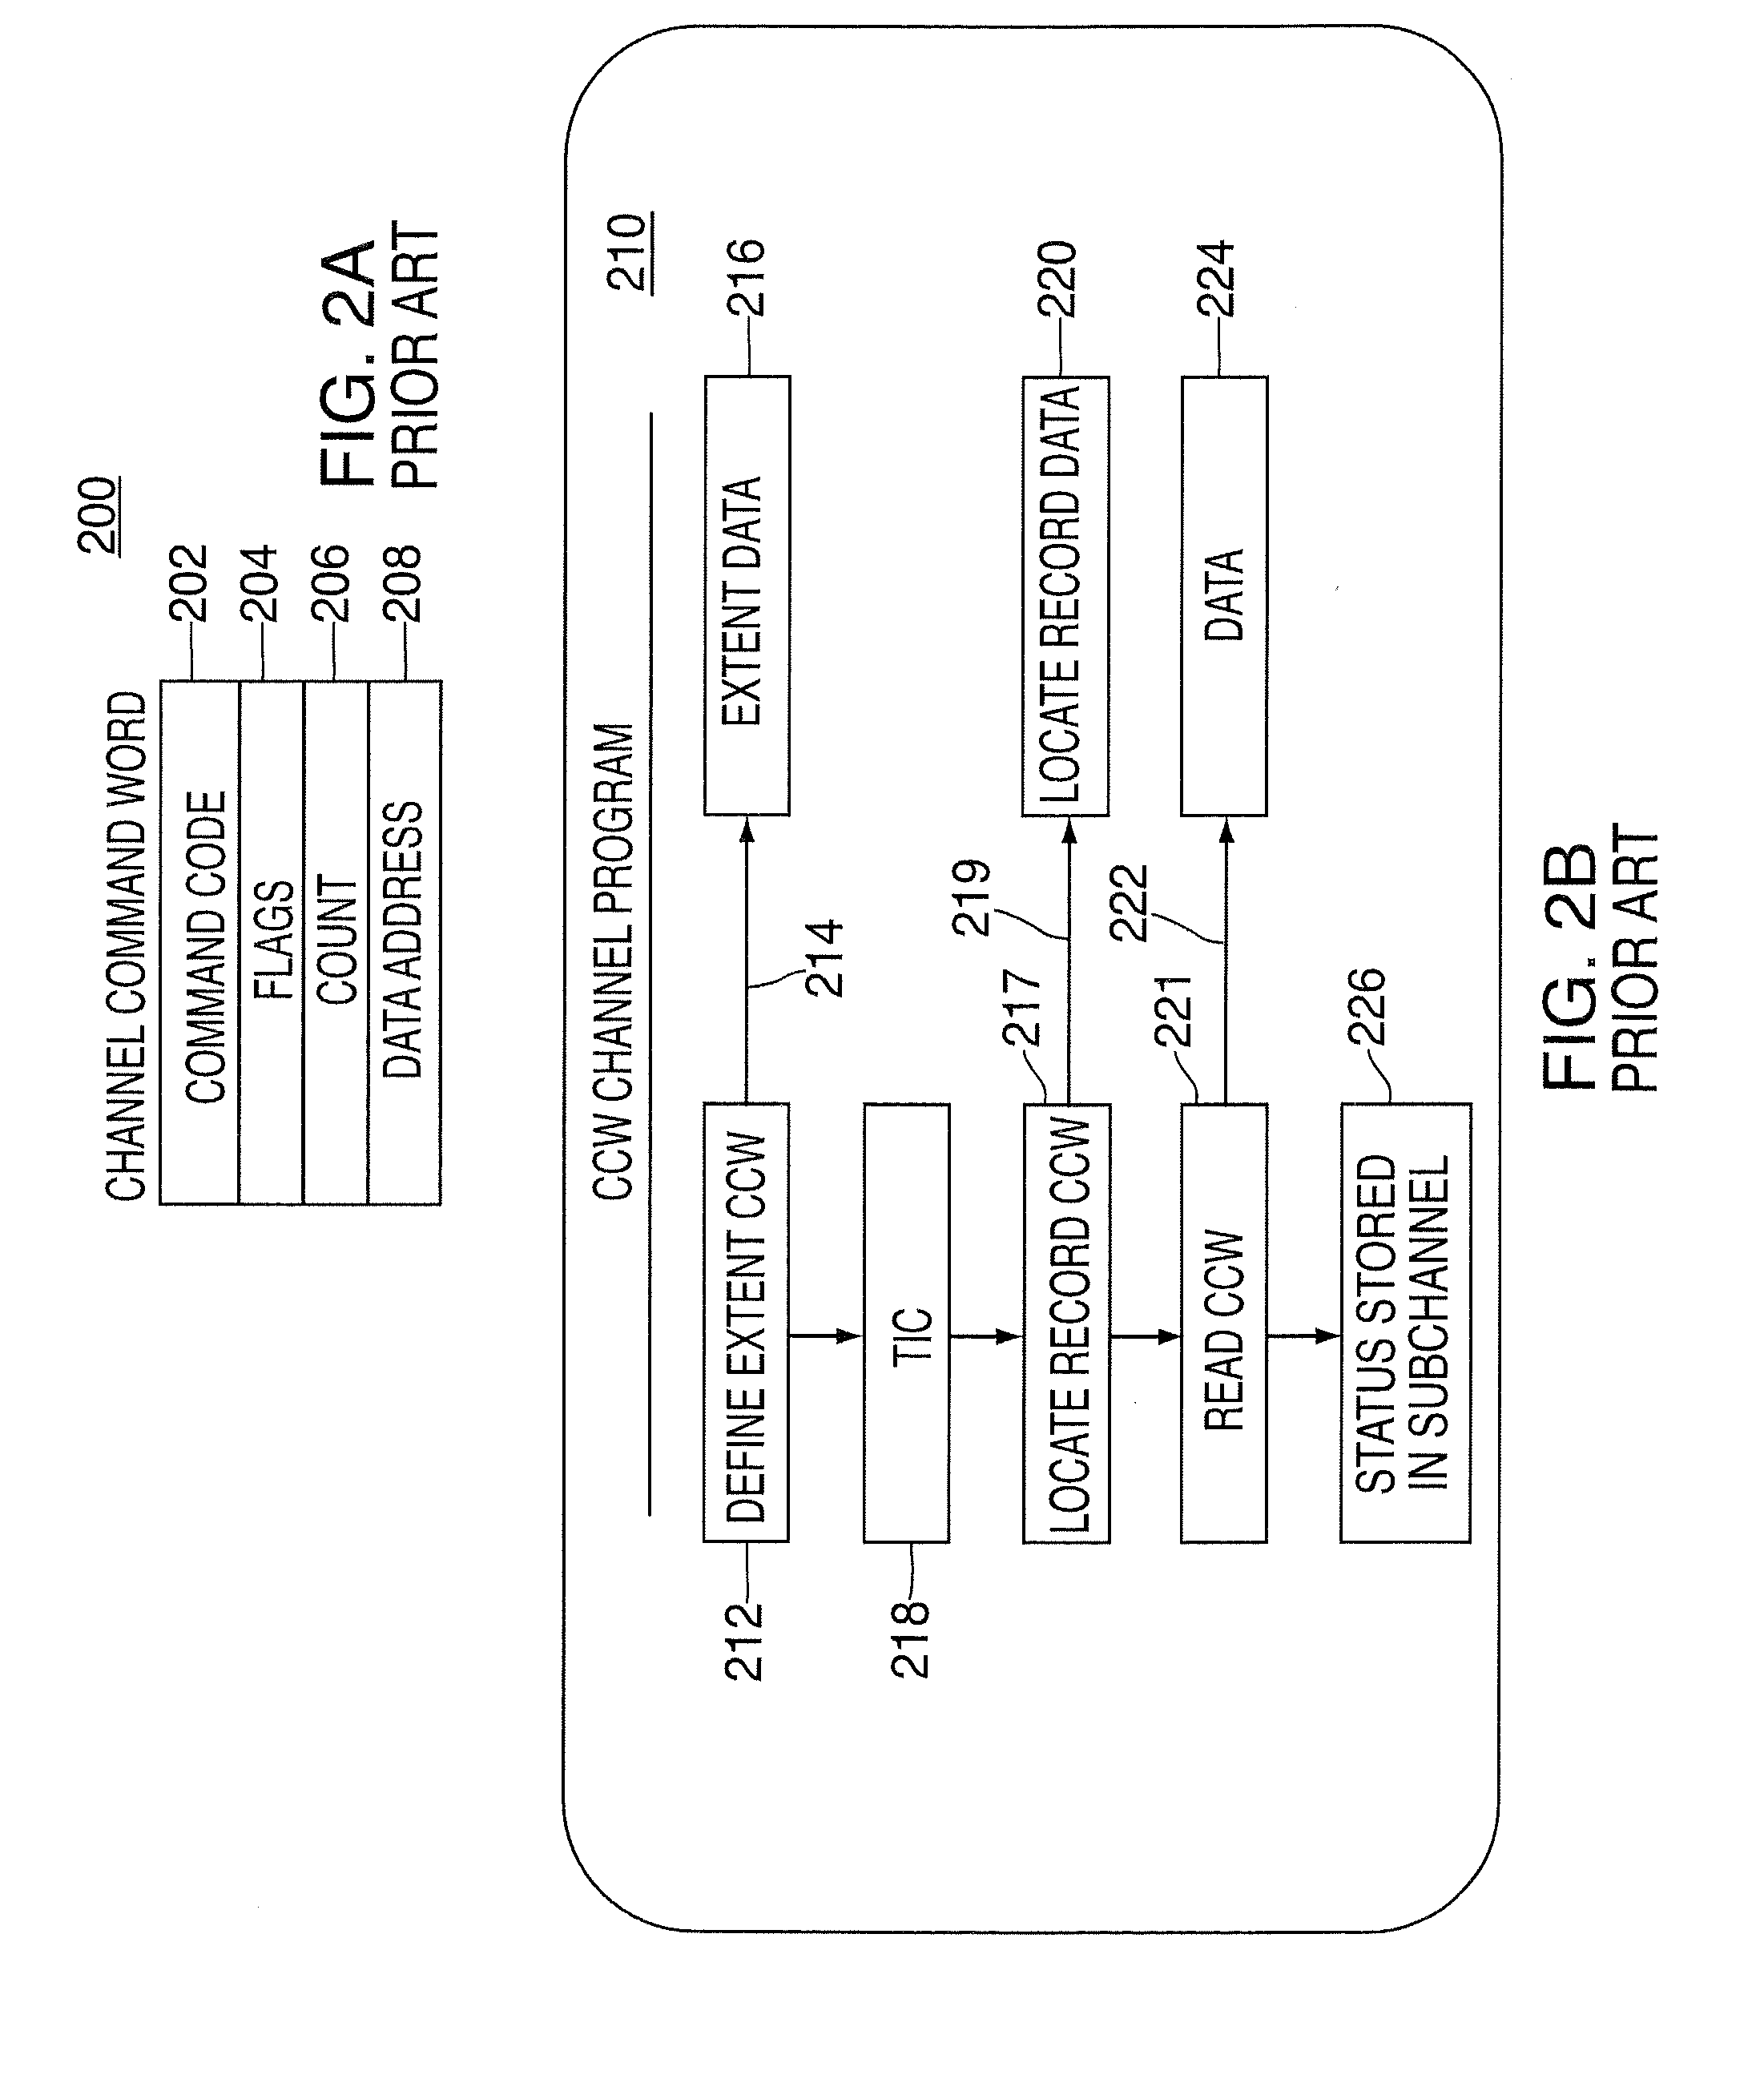 Processing of data to suspend operations in an input/output processing log-out system